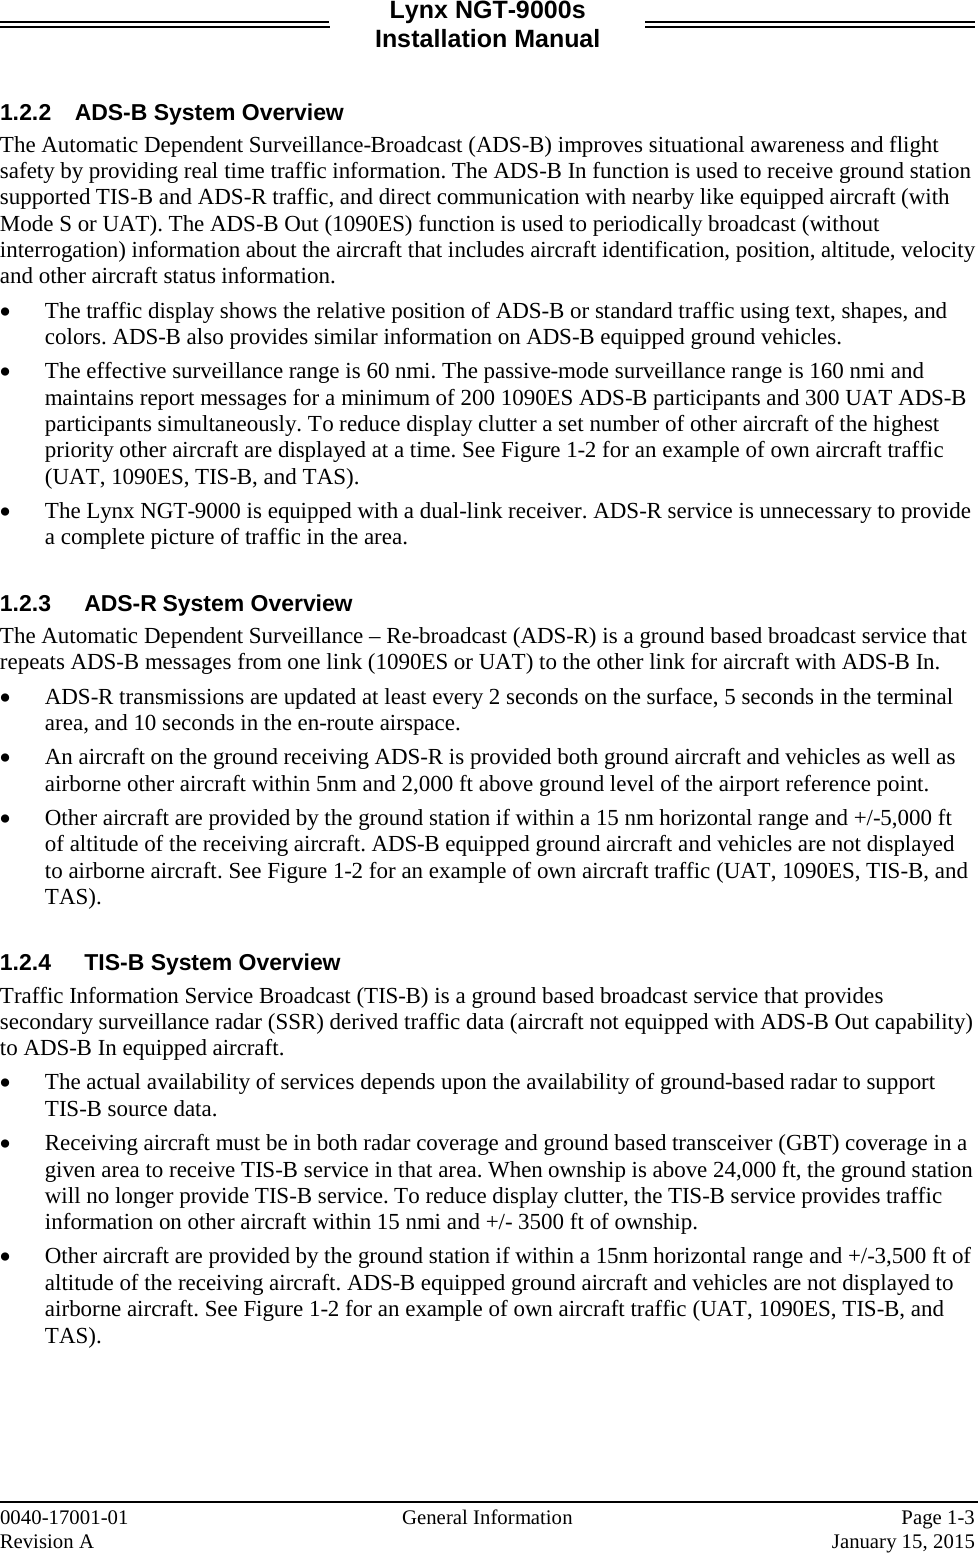 Lynx NGT-9000s Installation Manual   1.2.2 ADS-B System Overview The Automatic Dependent Surveillance-Broadcast (ADS-B) improves situational awareness and flight safety by providing real time traffic information. The ADS-B In function is used to receive ground station supported TIS-B and ADS-R traffic, and direct communication with nearby like equipped aircraft (with Mode S or UAT). The ADS-B Out (1090ES) function is used to periodically broadcast (without interrogation) information about the aircraft that includes aircraft identification, position, altitude, velocity and other aircraft status information. • The traffic display shows the relative position of ADS-B or standard traffic using text, shapes, and colors. ADS-B also provides similar information on ADS-B equipped ground vehicles.  • The effective surveillance range is 60 nmi. The passive-mode surveillance range is 160 nmi and maintains report messages for a minimum of 200 1090ES ADS-B participants and 300 UAT ADS-B participants simultaneously. To reduce display clutter a set number of other aircraft of the highest priority other aircraft are displayed at a time. See Figure 1-2 for an example of own aircraft traffic (UAT, 1090ES, TIS-B, and TAS). • The Lynx NGT-9000 is equipped with a dual-link receiver. ADS-R service is unnecessary to provide a complete picture of traffic in the area.  1.2.3 ADS-R System Overview The Automatic Dependent Surveillance – Re-broadcast (ADS-R) is a ground based broadcast service that repeats ADS-B messages from one link (1090ES or UAT) to the other link for aircraft with ADS-B In.  • ADS-R transmissions are updated at least every 2 seconds on the surface, 5 seconds in the terminal area, and 10 seconds in the en-route airspace. • An aircraft on the ground receiving ADS-R is provided both ground aircraft and vehicles as well as airborne other aircraft within 5nm and 2,000 ft above ground level of the airport reference point. • Other aircraft are provided by the ground station if within a 15 nm horizontal range and +/-5,000 ft of altitude of the receiving aircraft. ADS-B equipped ground aircraft and vehicles are not displayed to airborne aircraft. See Figure 1-2 for an example of own aircraft traffic (UAT, 1090ES, TIS-B, and TAS).  1.2.4 TIS-B System Overview Traffic Information Service Broadcast (TIS-B) is a ground based broadcast service that provides secondary surveillance radar (SSR) derived traffic data (aircraft not equipped with ADS-B Out capability) to ADS-B In equipped aircraft.  • The actual availability of services depends upon the availability of ground-based radar to support TIS-B source data. • Receiving aircraft must be in both radar coverage and ground based transceiver (GBT) coverage in a given area to receive TIS-B service in that area. When ownship is above 24,000 ft, the ground station will no longer provide TIS-B service. To reduce display clutter, the TIS-B service provides traffic information on other aircraft within 15 nmi and +/- 3500 ft of ownship.  • Other aircraft are provided by the ground station if within a 15nm horizontal range and +/-3,500 ft of altitude of the receiving aircraft. ADS-B equipped ground aircraft and vehicles are not displayed to airborne aircraft. See Figure 1-2 for an example of own aircraft traffic (UAT, 1090ES, TIS-B, and TAS).    0040-17001-01    General Information Page 1-3 Revision A     January 15, 2015 